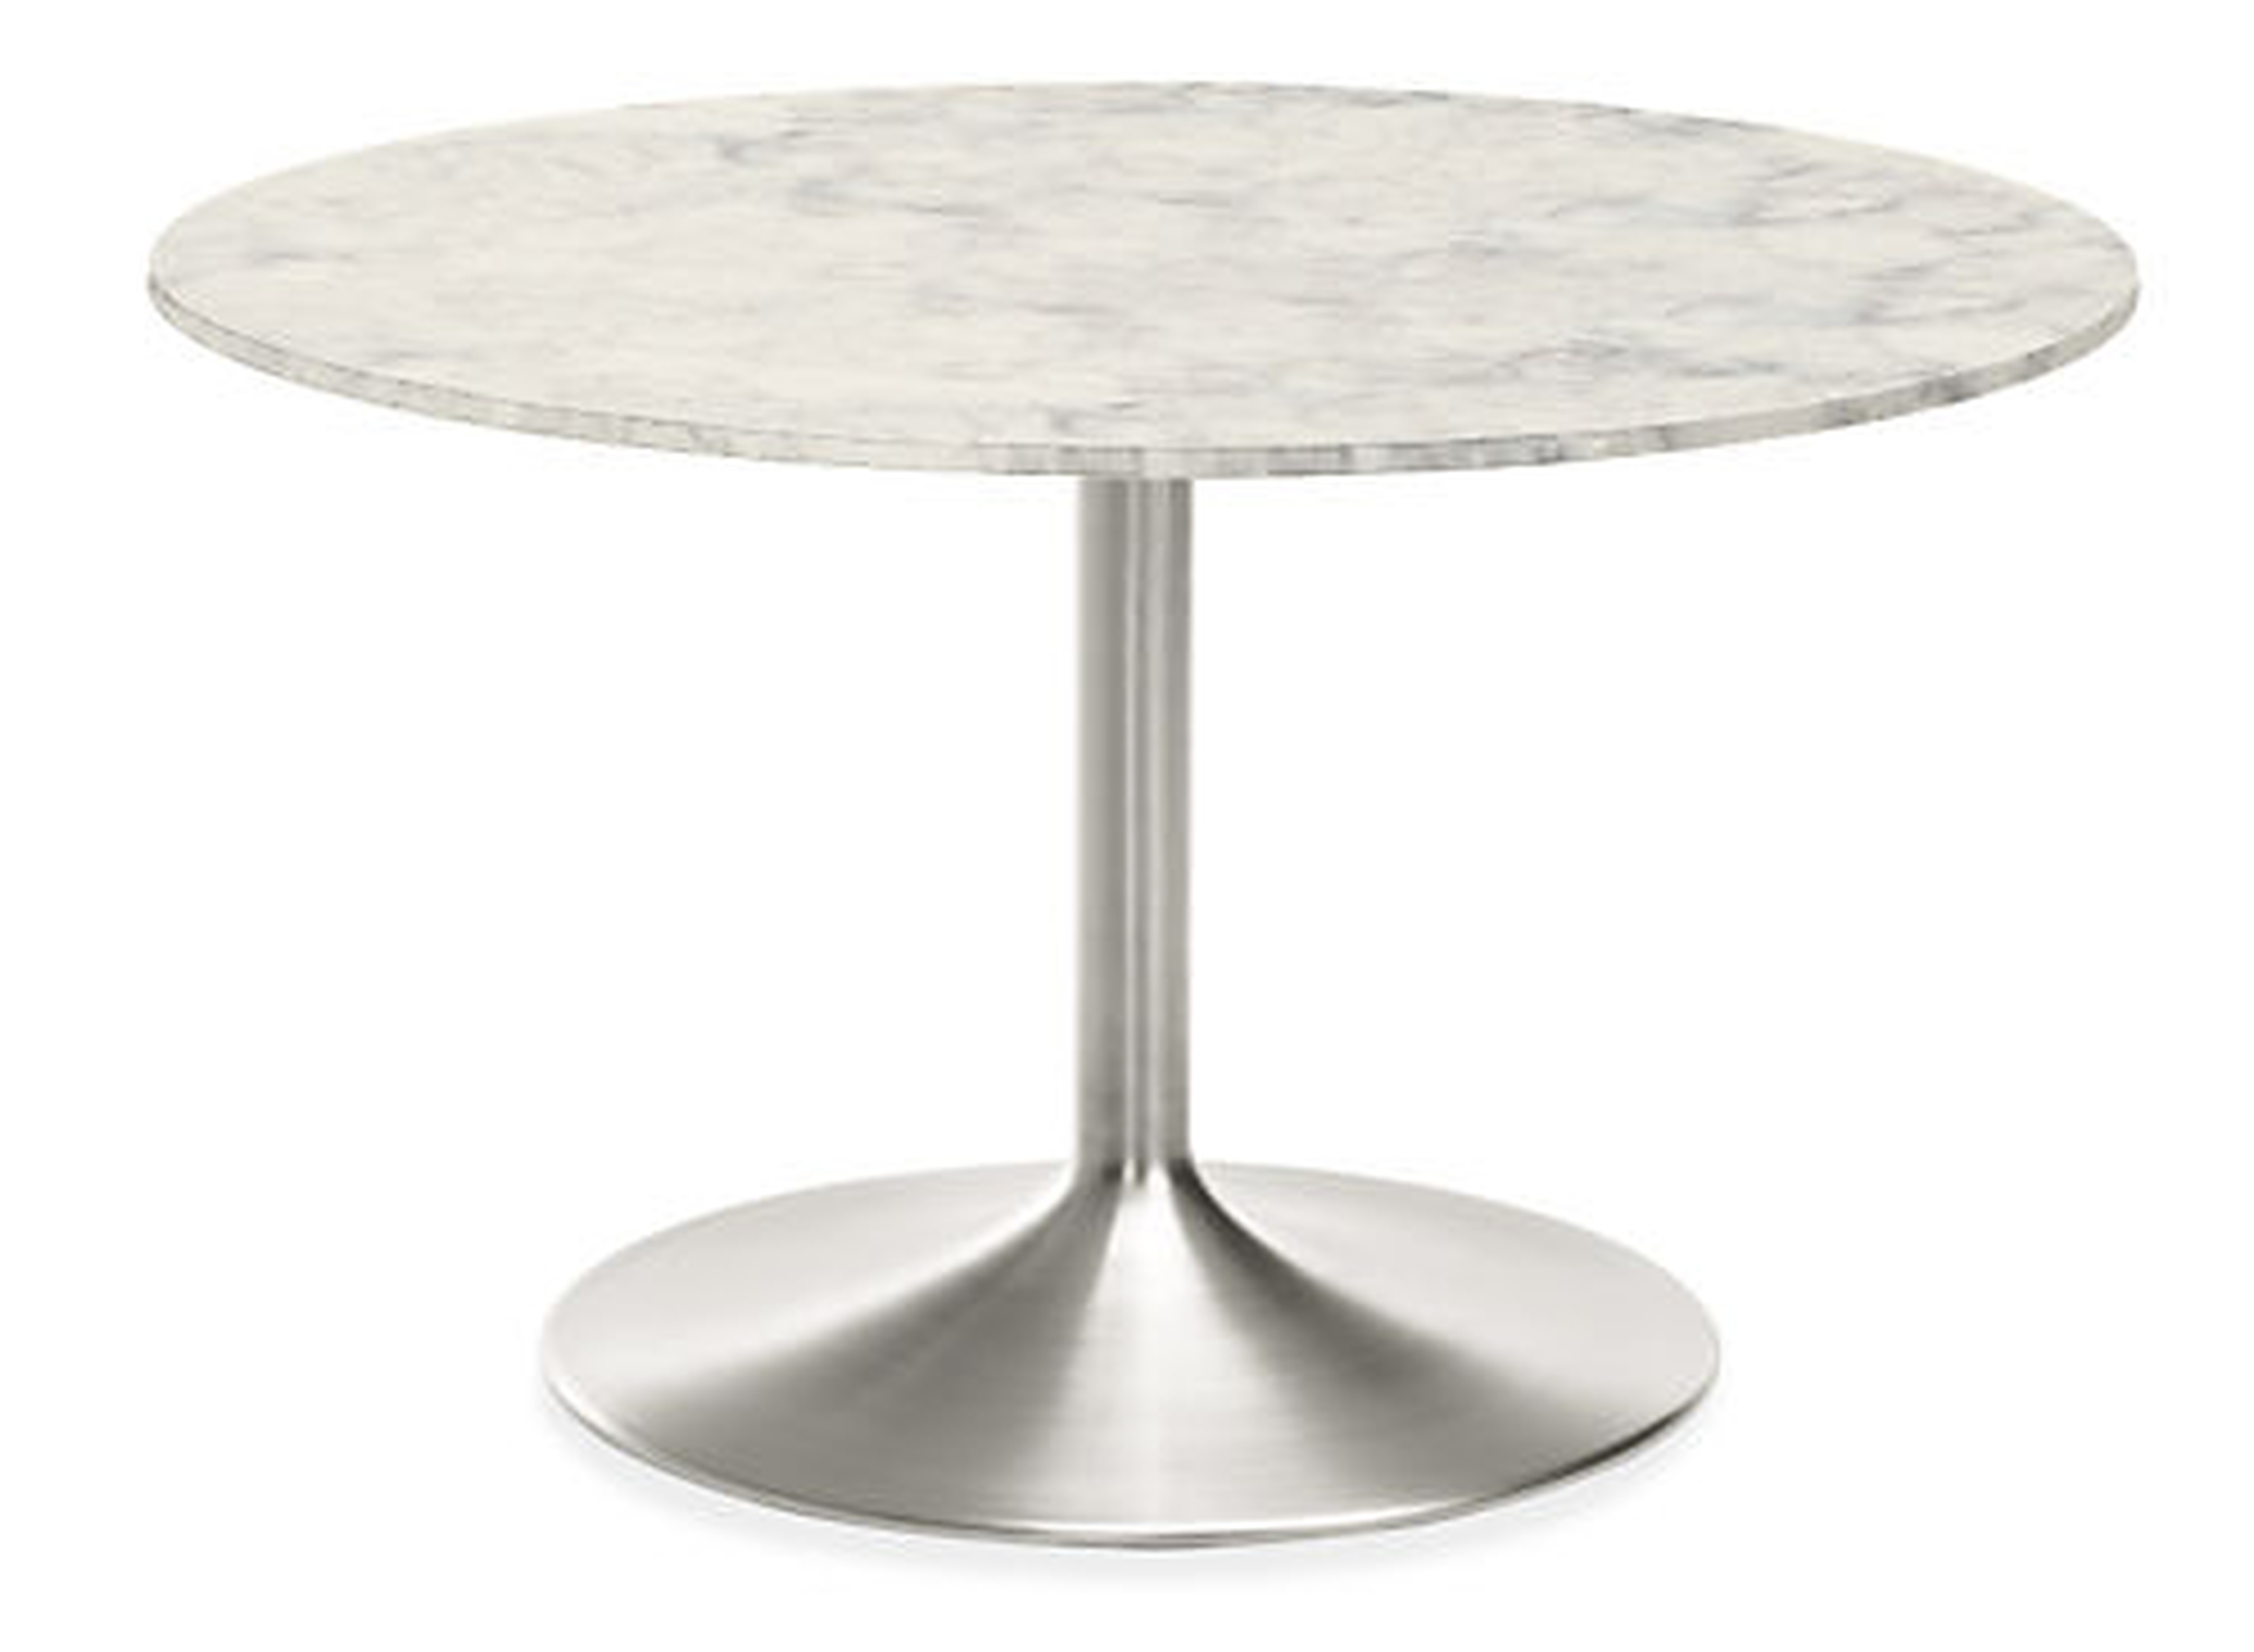 Aria Round Table - Aria 36"  Round Table Top: Marble white quartz Base: Stainless Steel - Room & Board